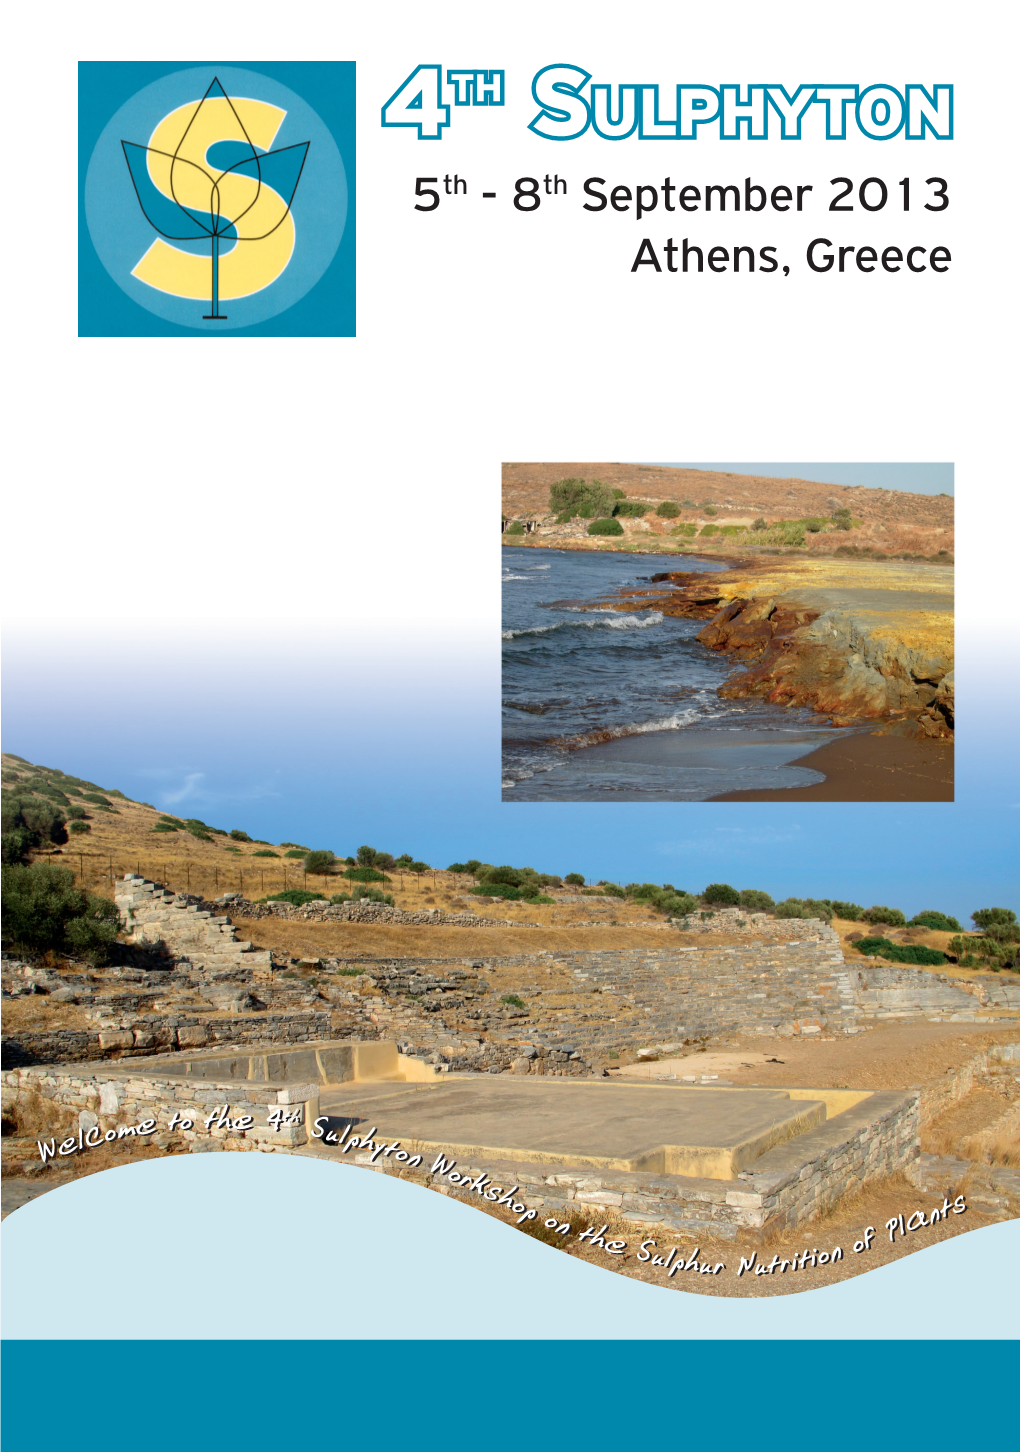 4Th Sulphyton 5Th - 8Th September 2013 Athens, Greece